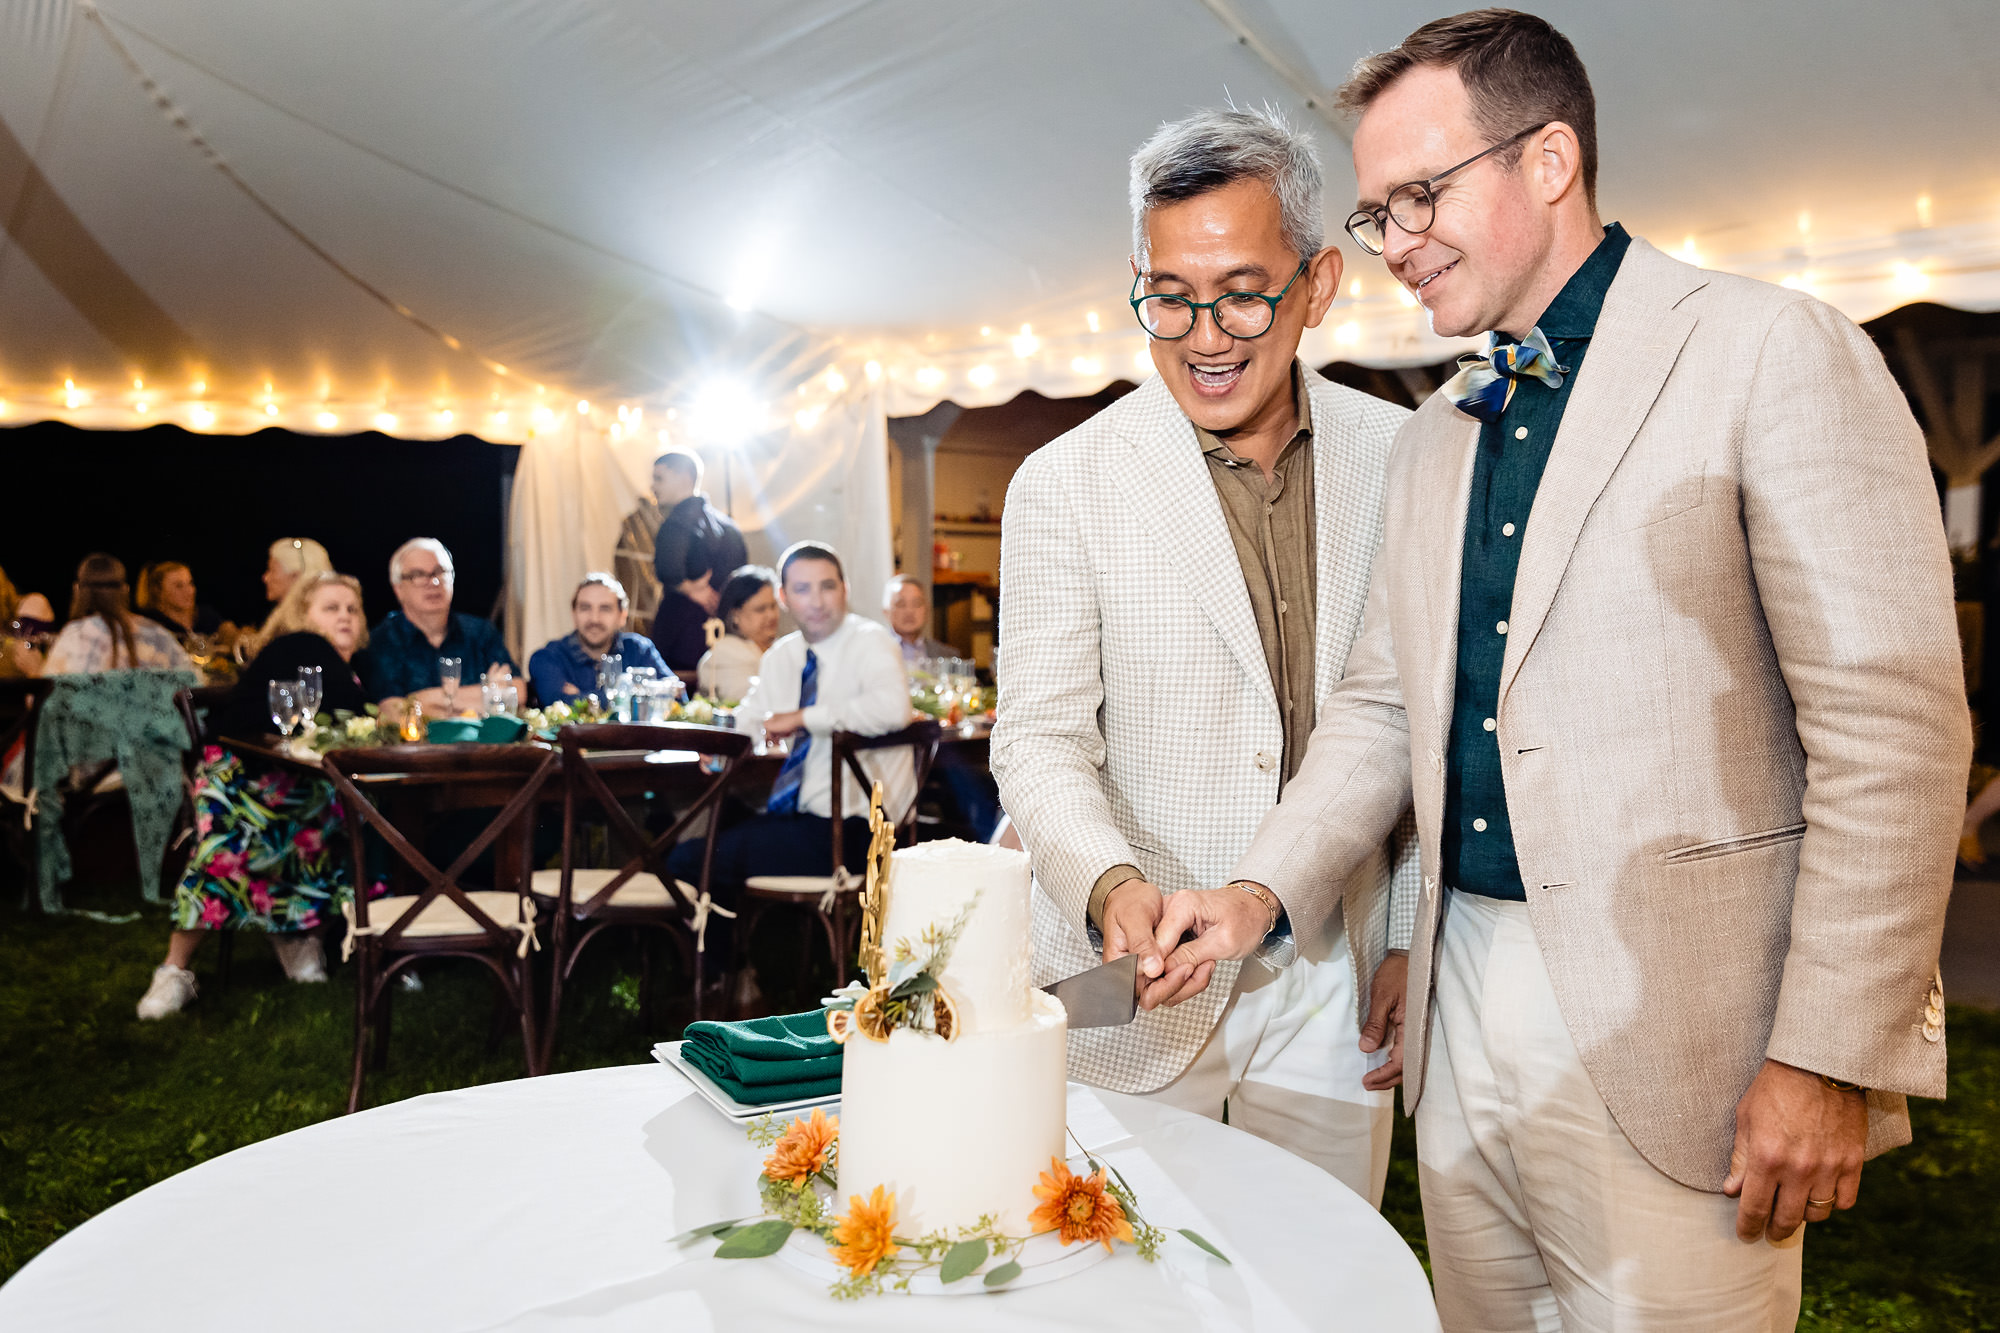 The grooms cut the cake at their wedding in western Maine